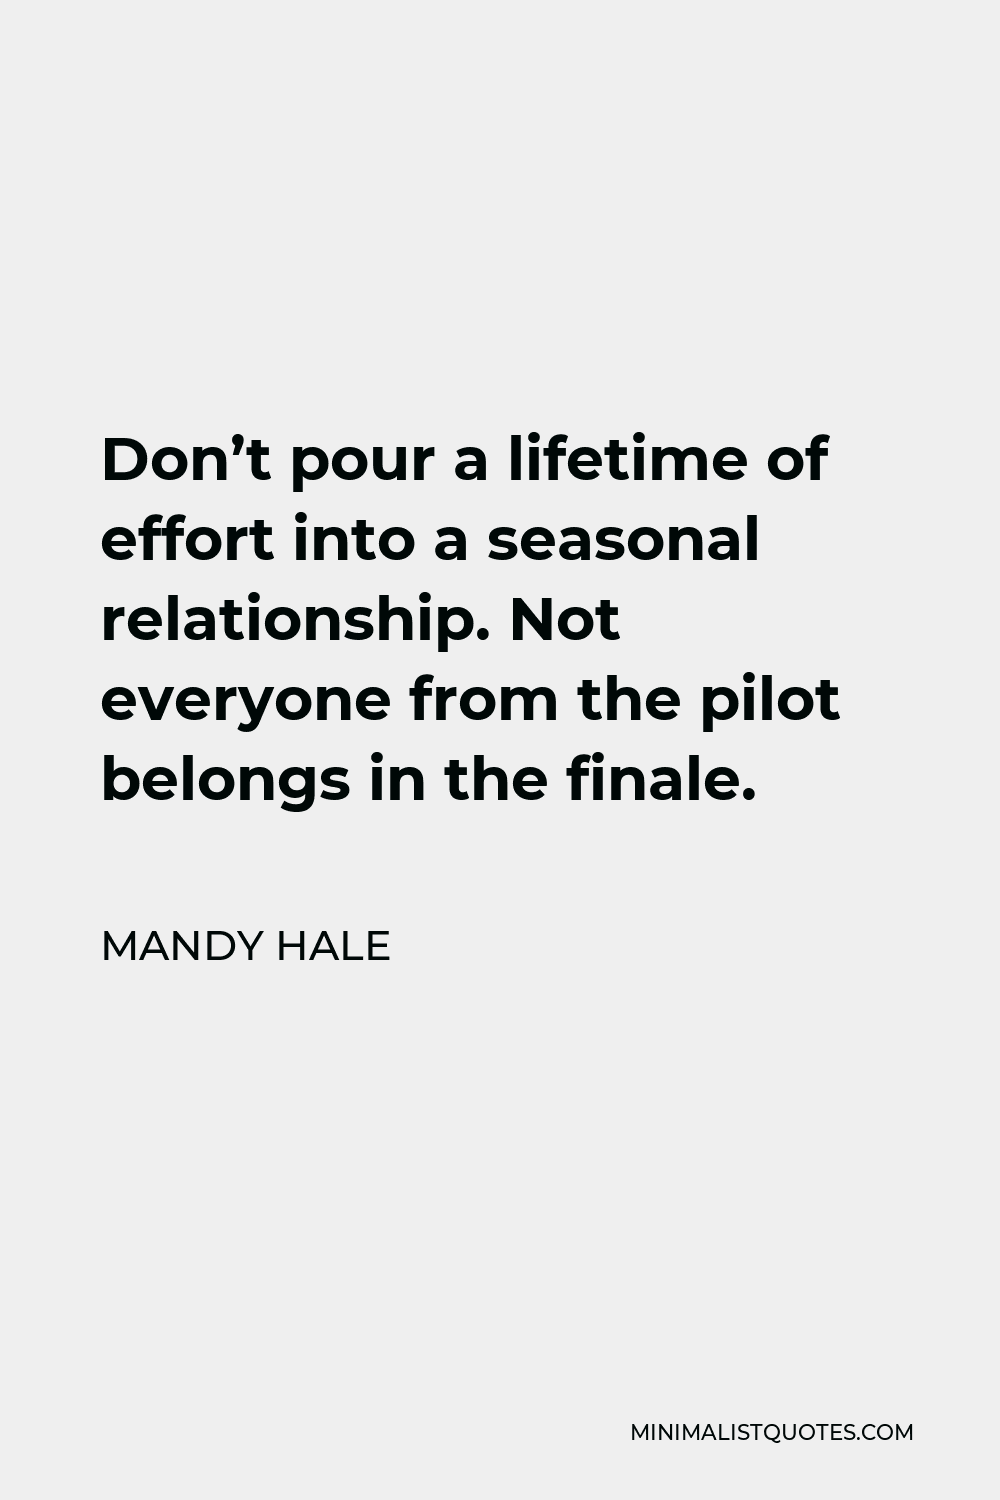 Mandy Hale Quote - Don’t pour a lifetime of effort into a seasonal relationship. Not everyone from the pilot belongs in the finale.